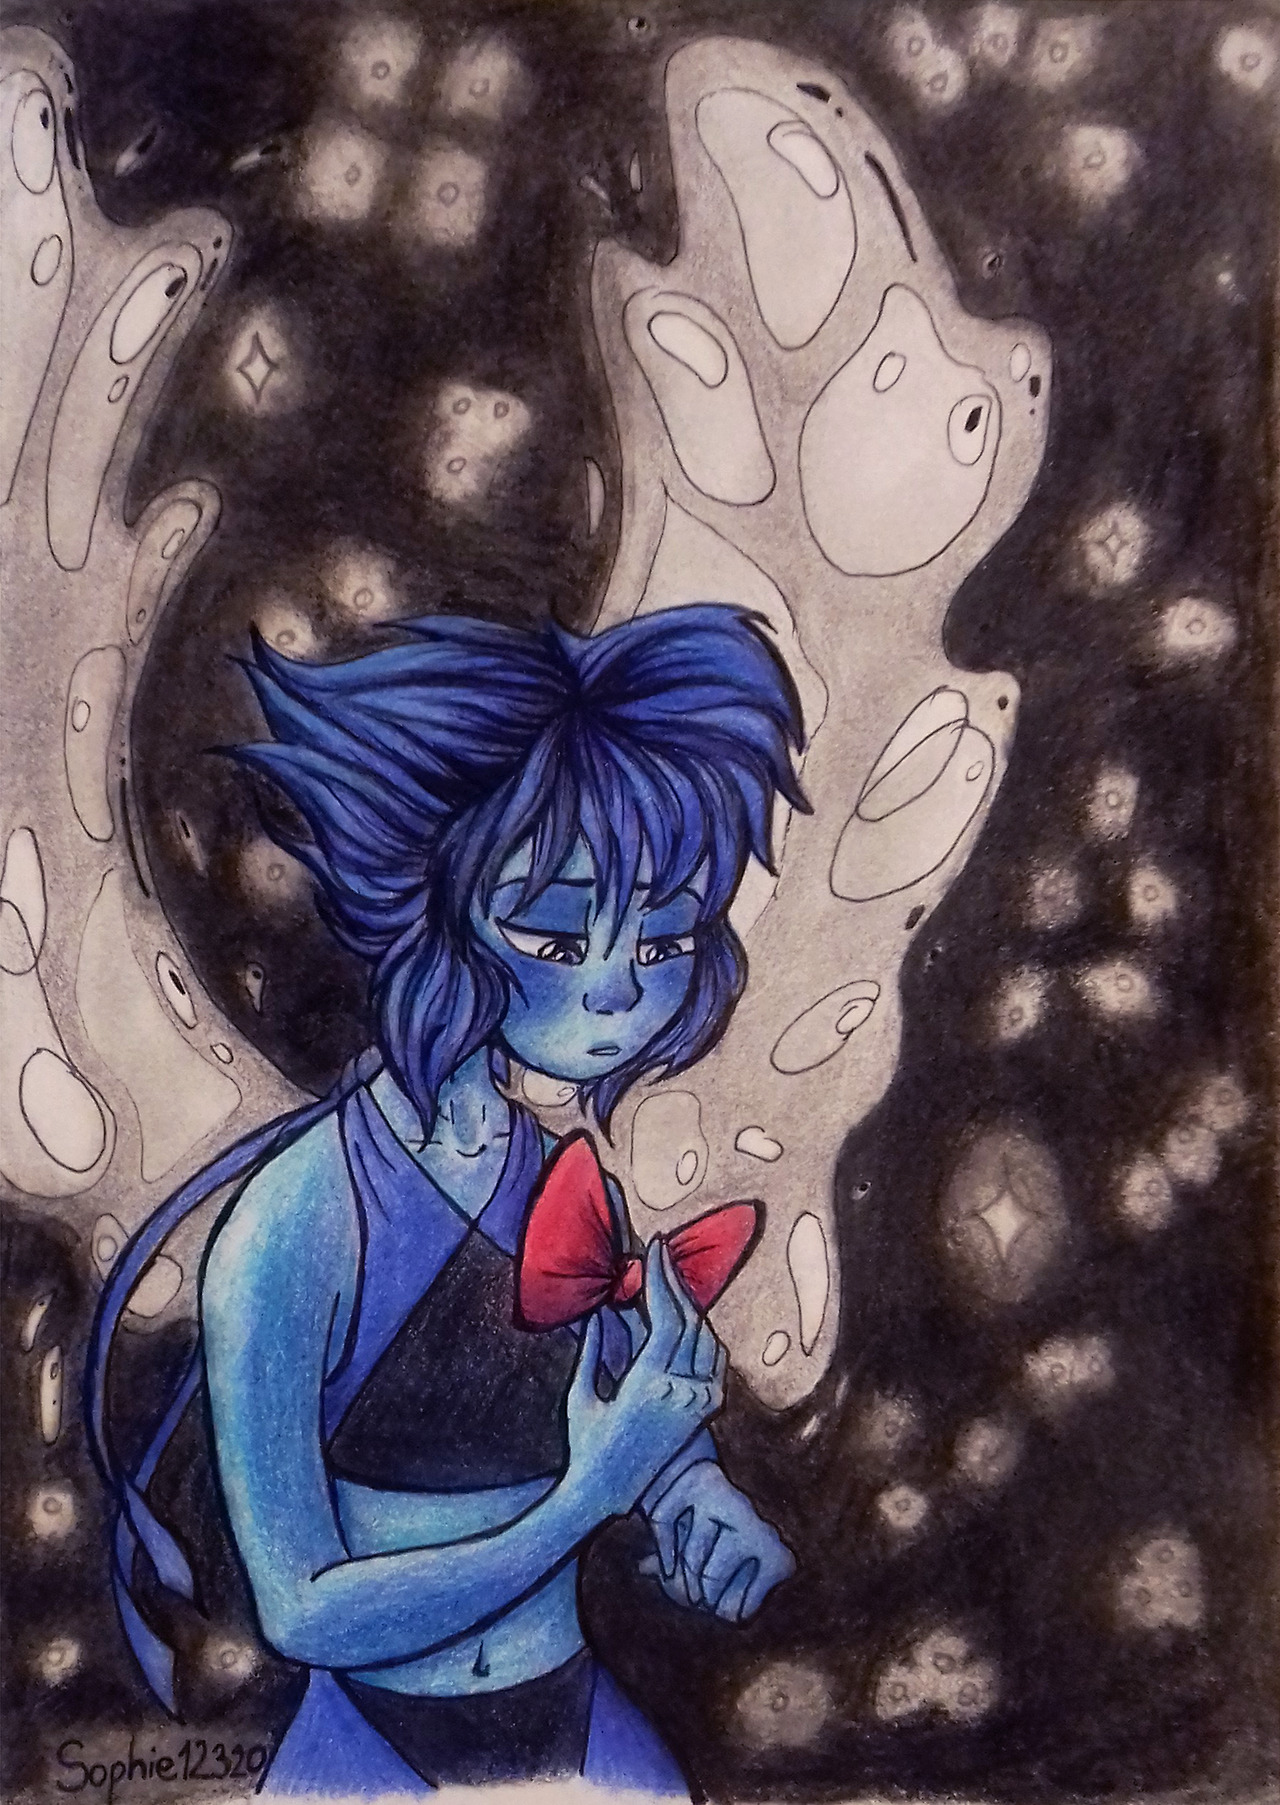 The last SU episodes were really inspiring, once I started making these drawings I couldn’t look away from my sketchbook for 3 days. I haven’t drawn with colored pencils for a while, it was really...